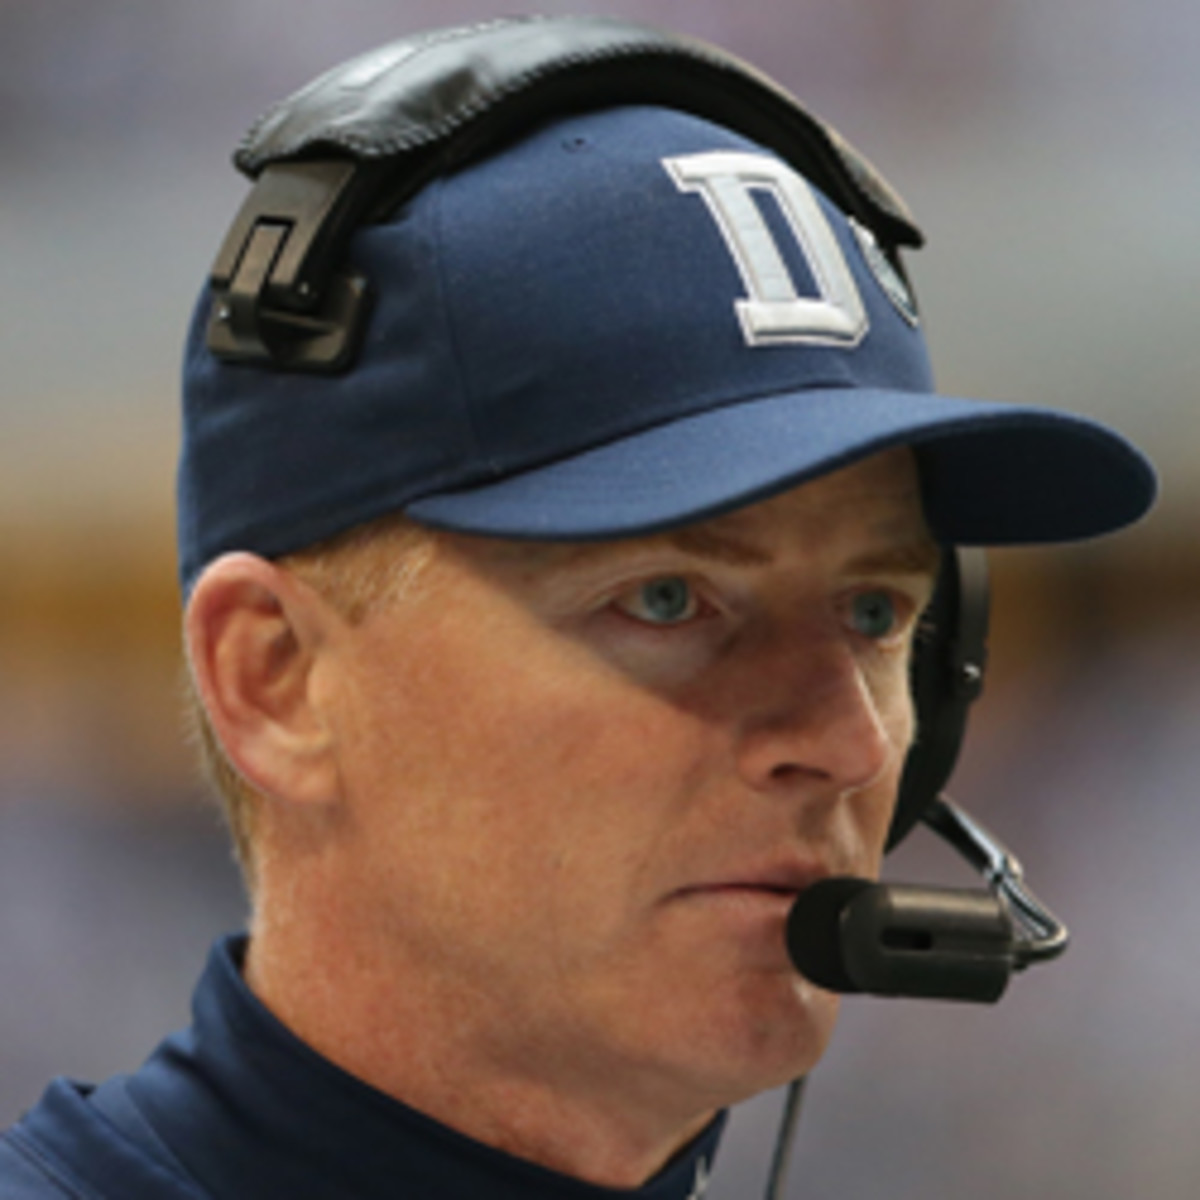 Cowboys head coach Jason Garrett has been criticized for clock management miscues while calling plays. (Ronald Martinez/Getty Images)